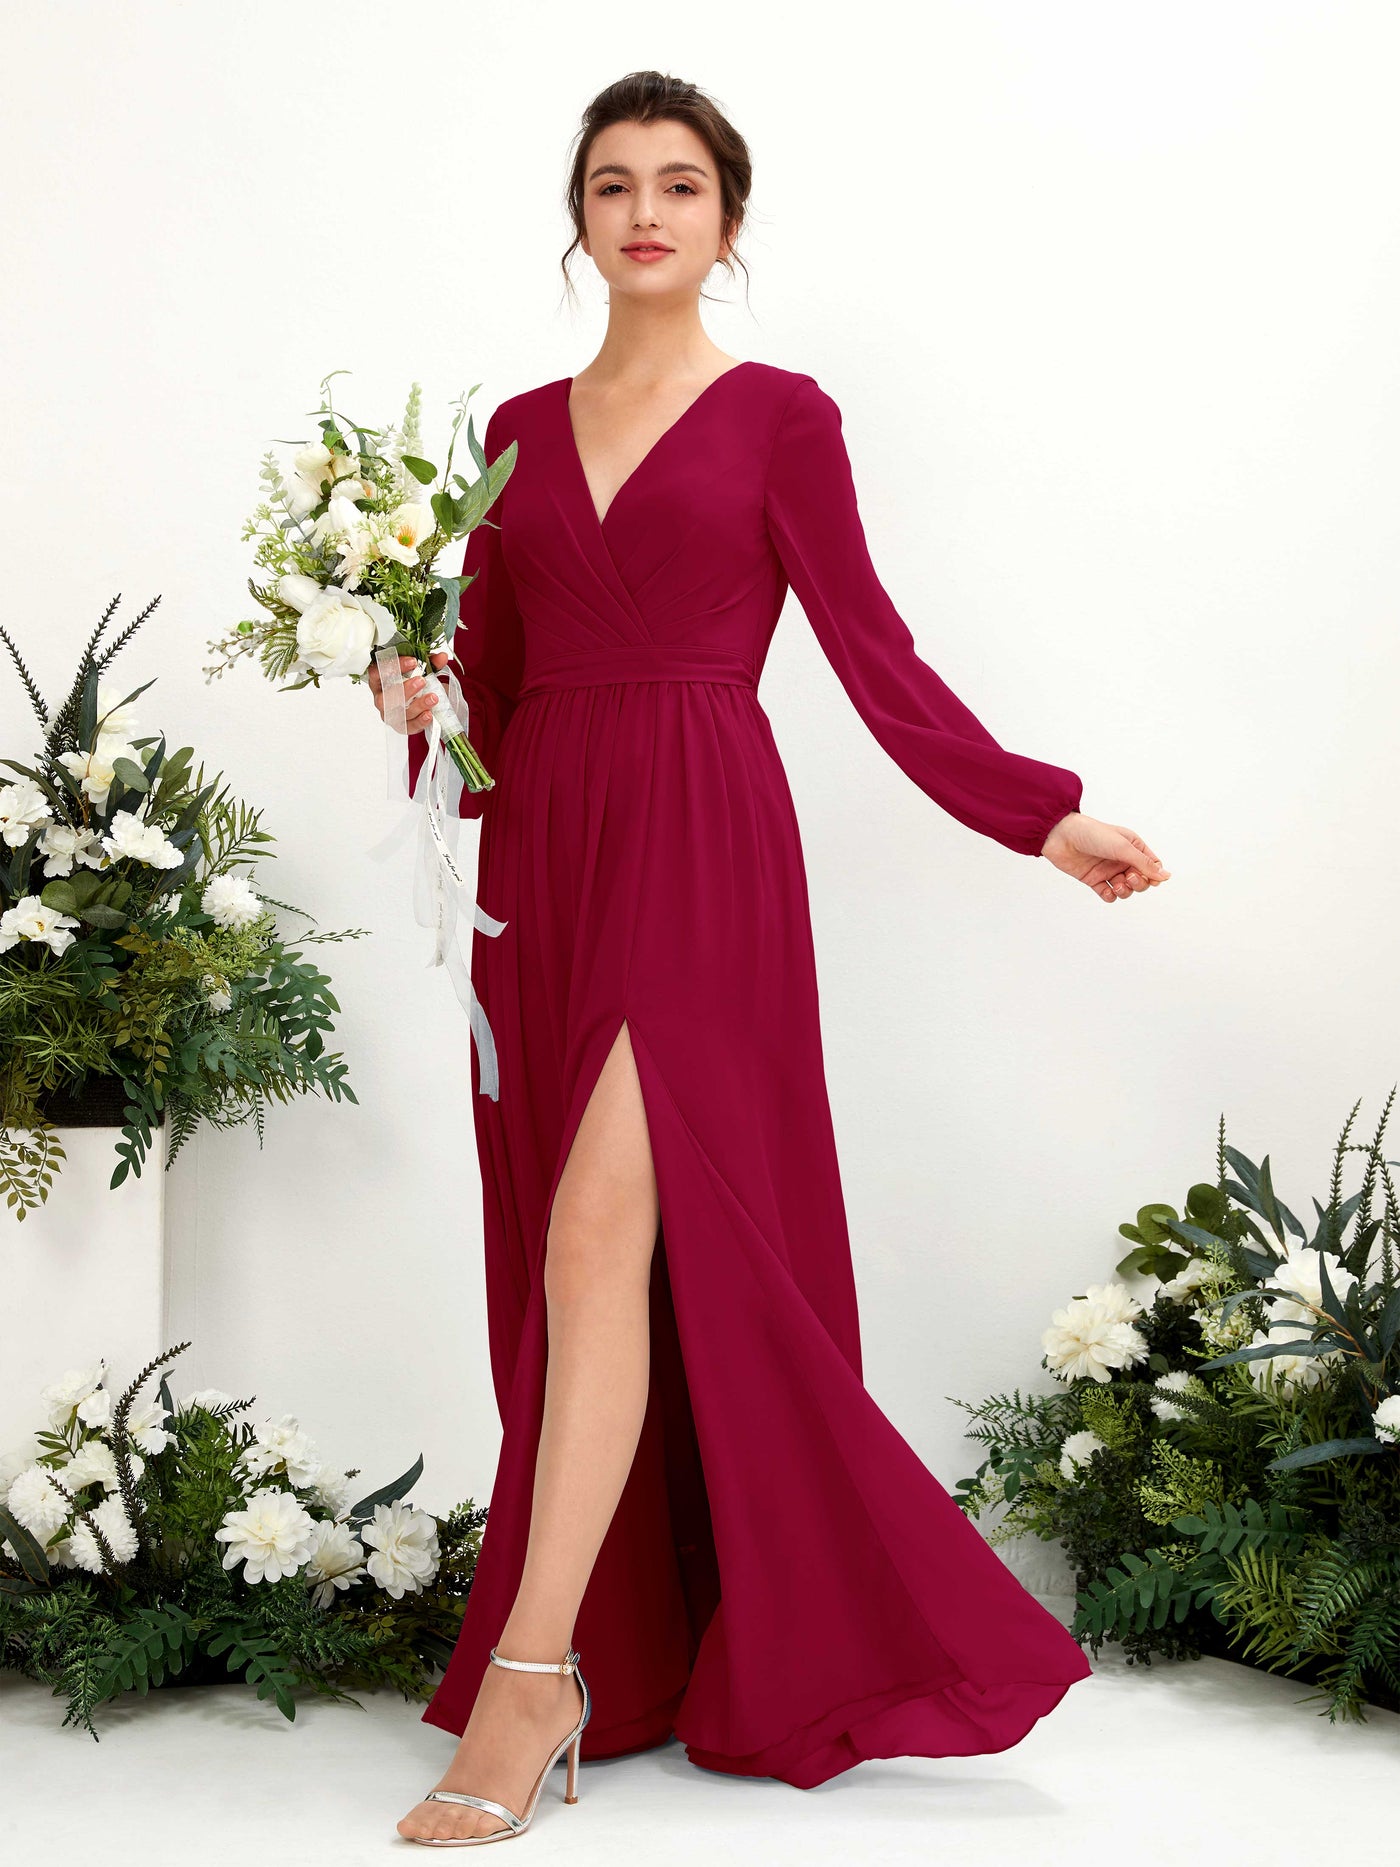 Jester Red Bridesmaid Dresses Bridesmaid Dress A-line Chiffon V-neck Full Length Long Sleeves Wedding Party Dress (81223841)#color_jester-red